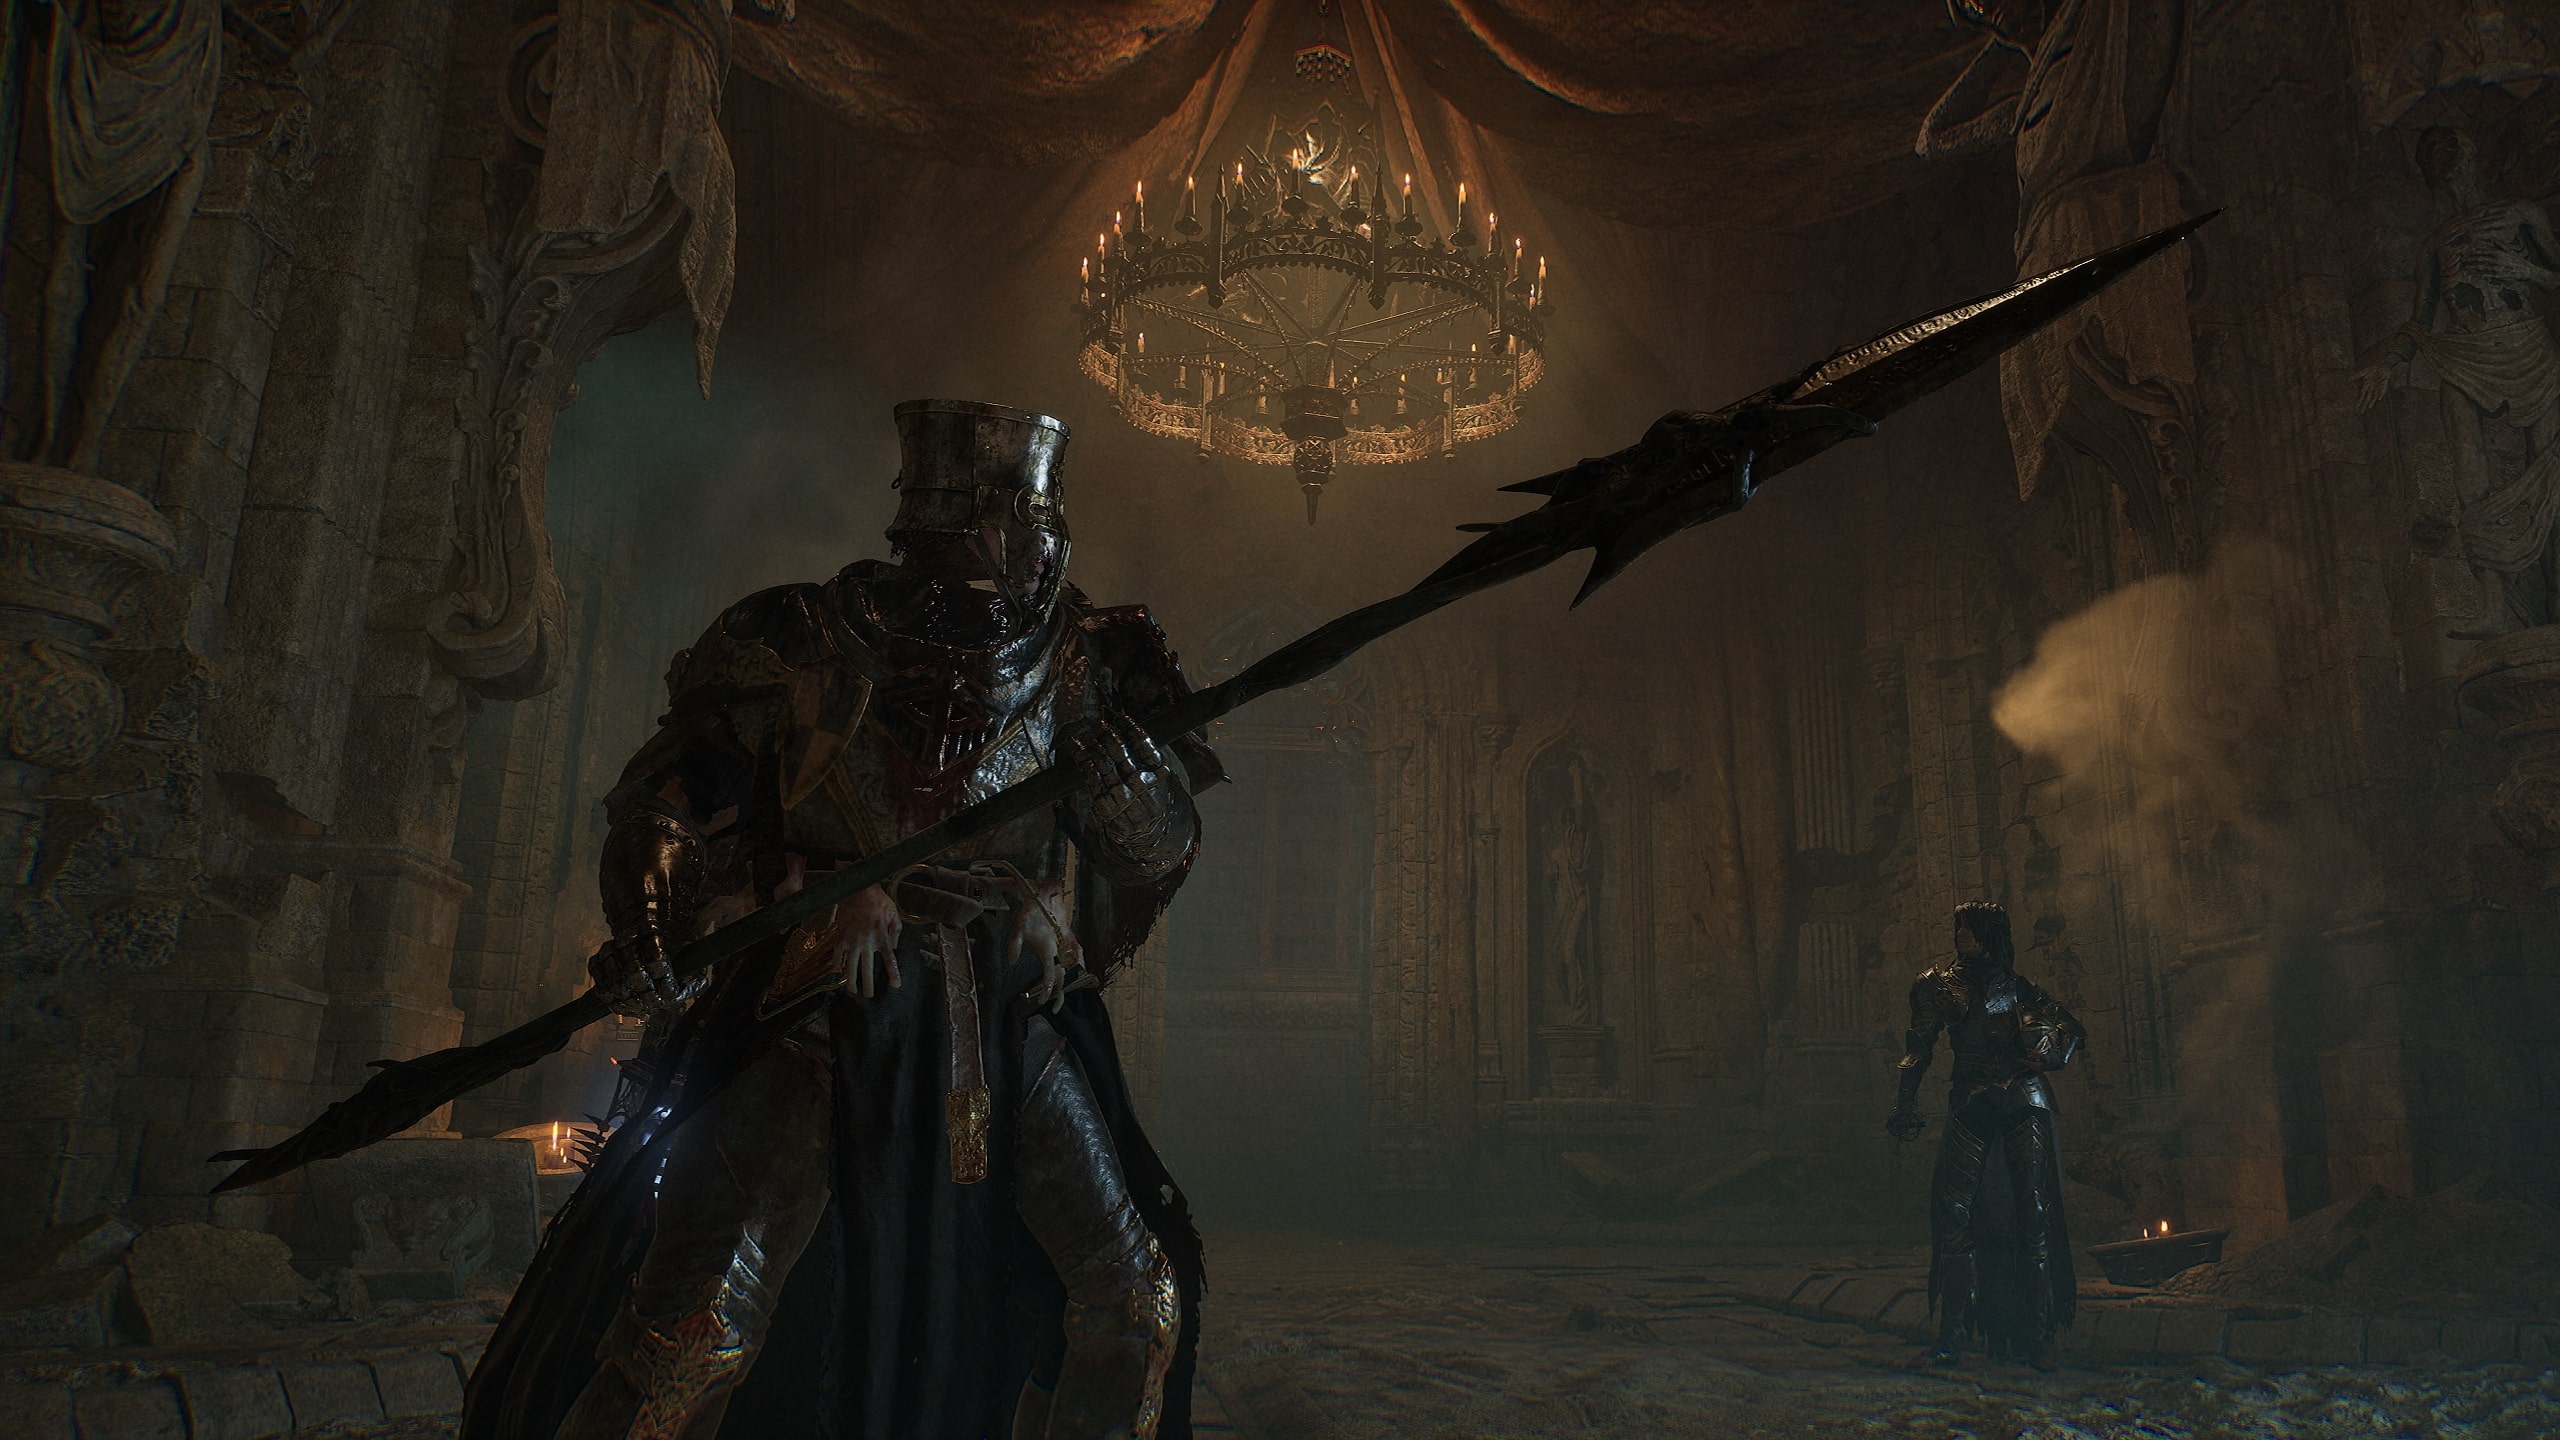 Lords of the Fallen boss weapons: How to get them